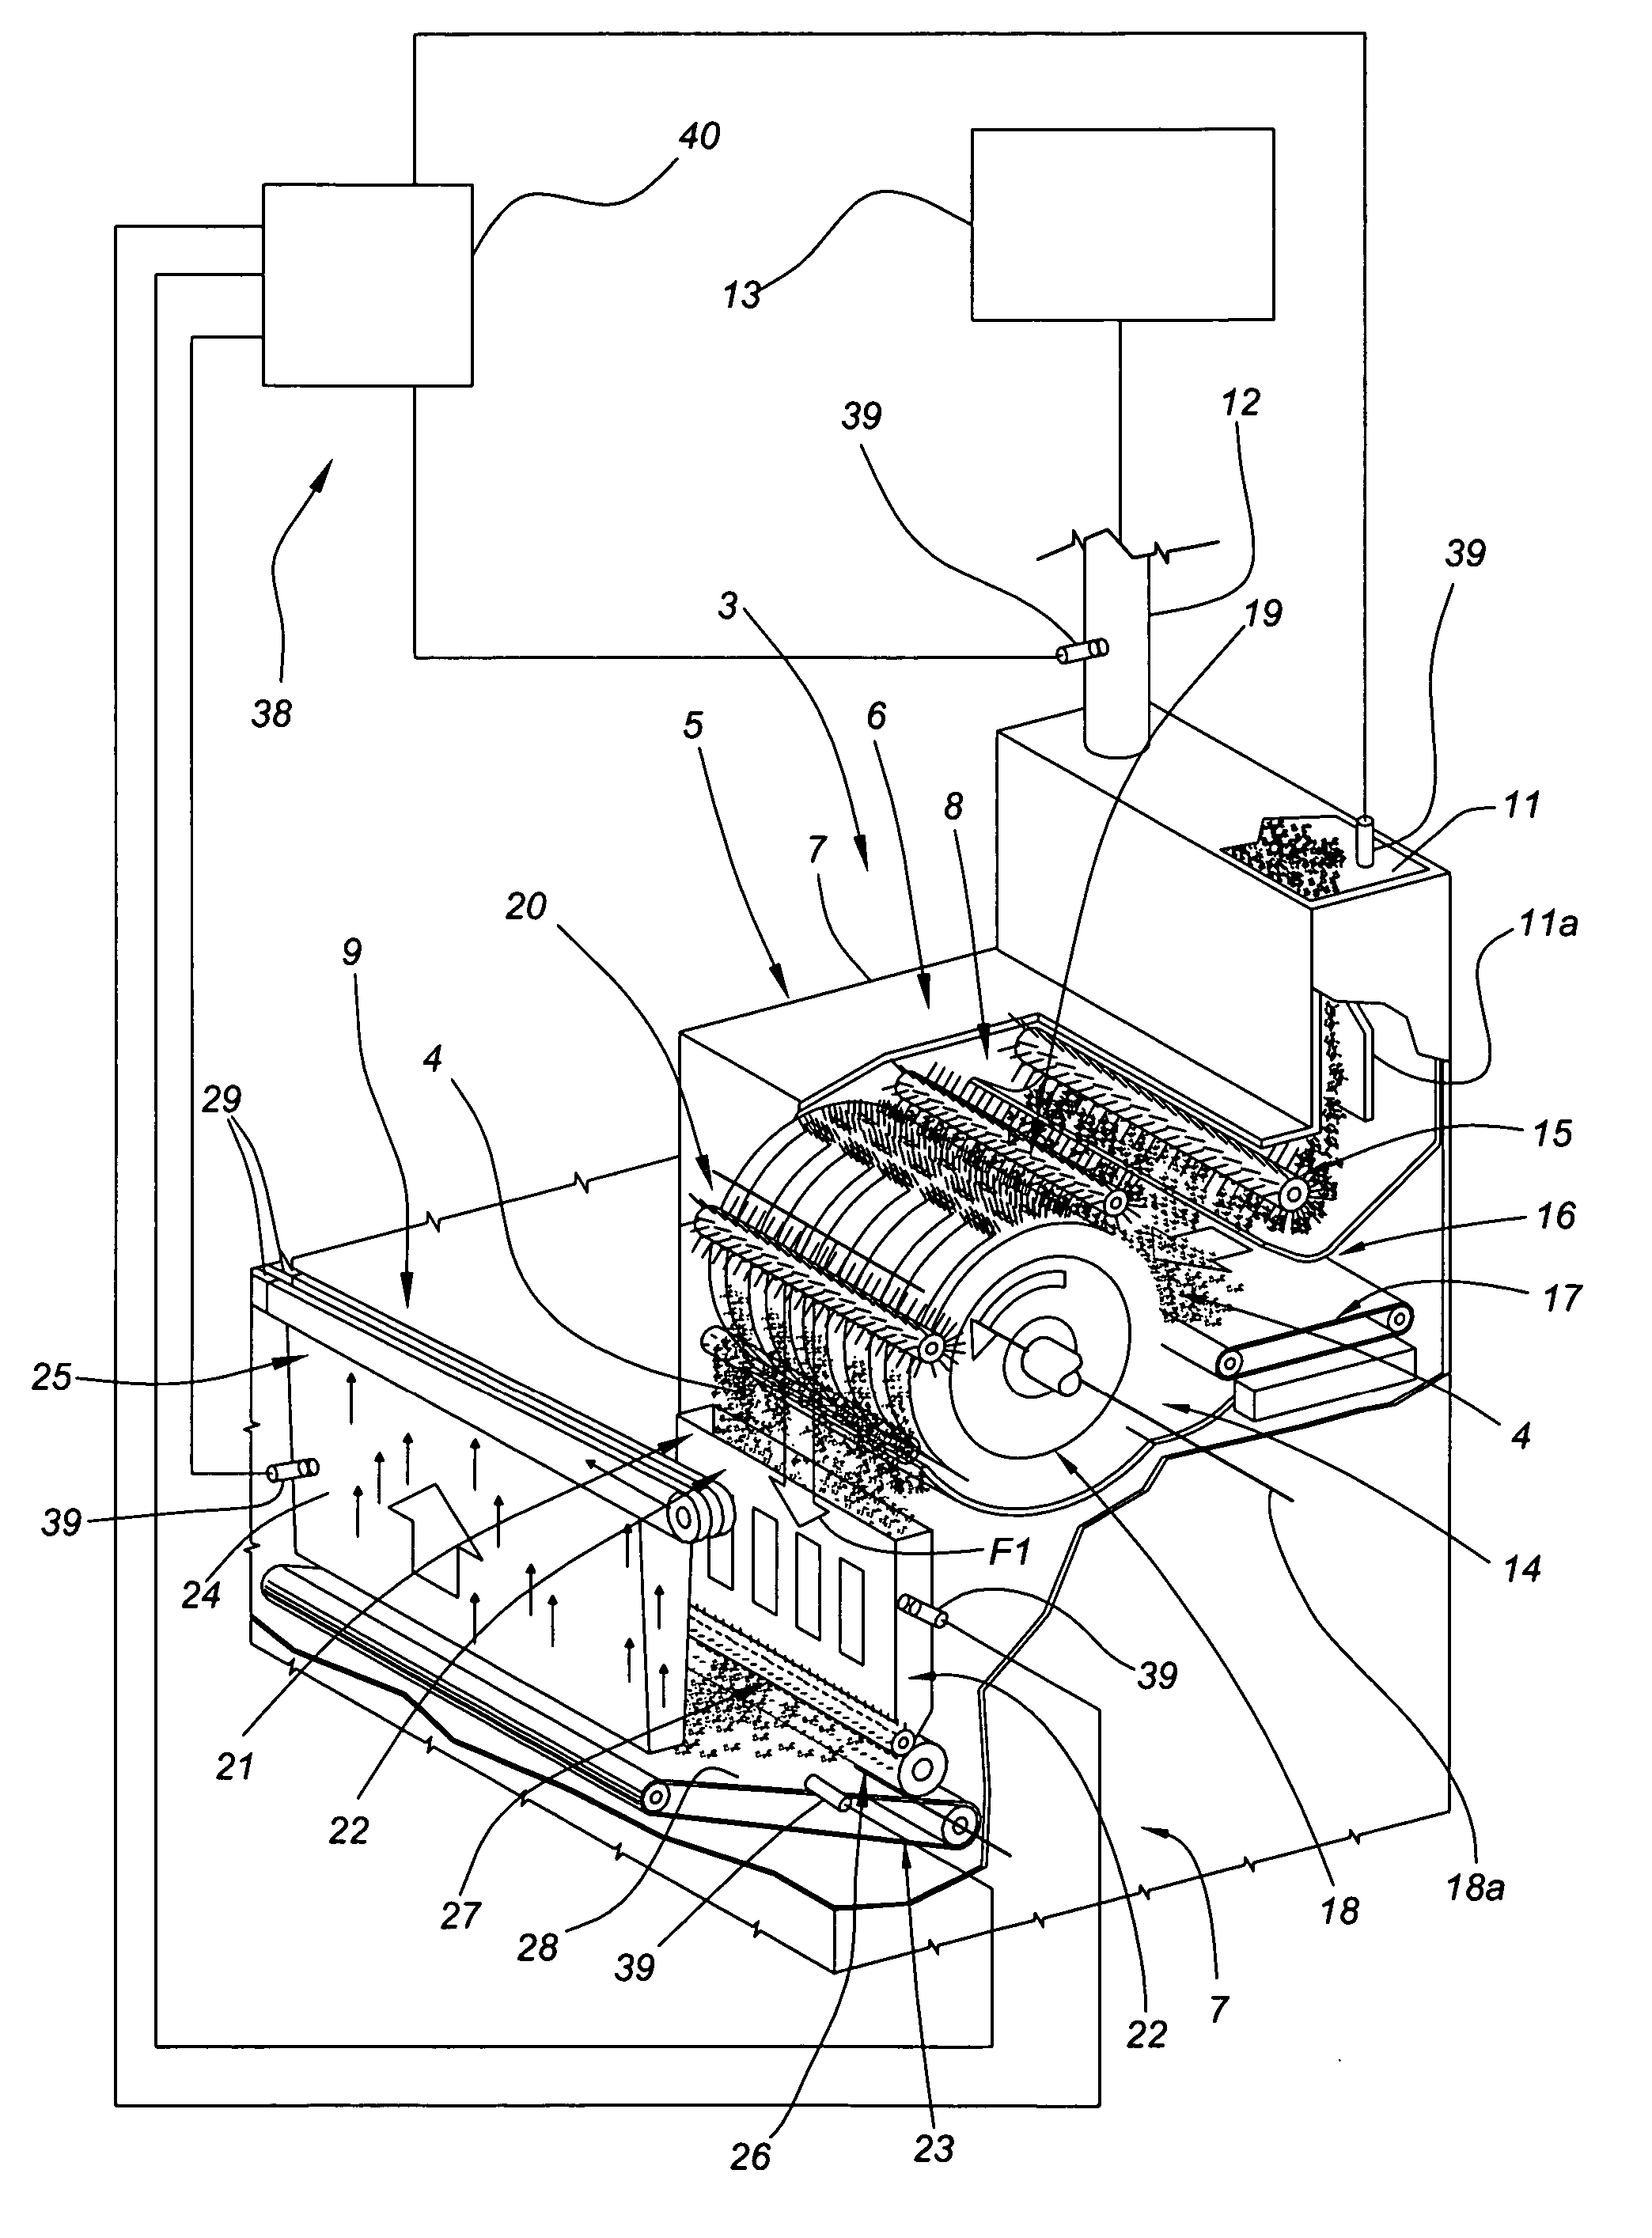 Unit and a method for feeding tobacco in a machine for manufacturing tobacco products